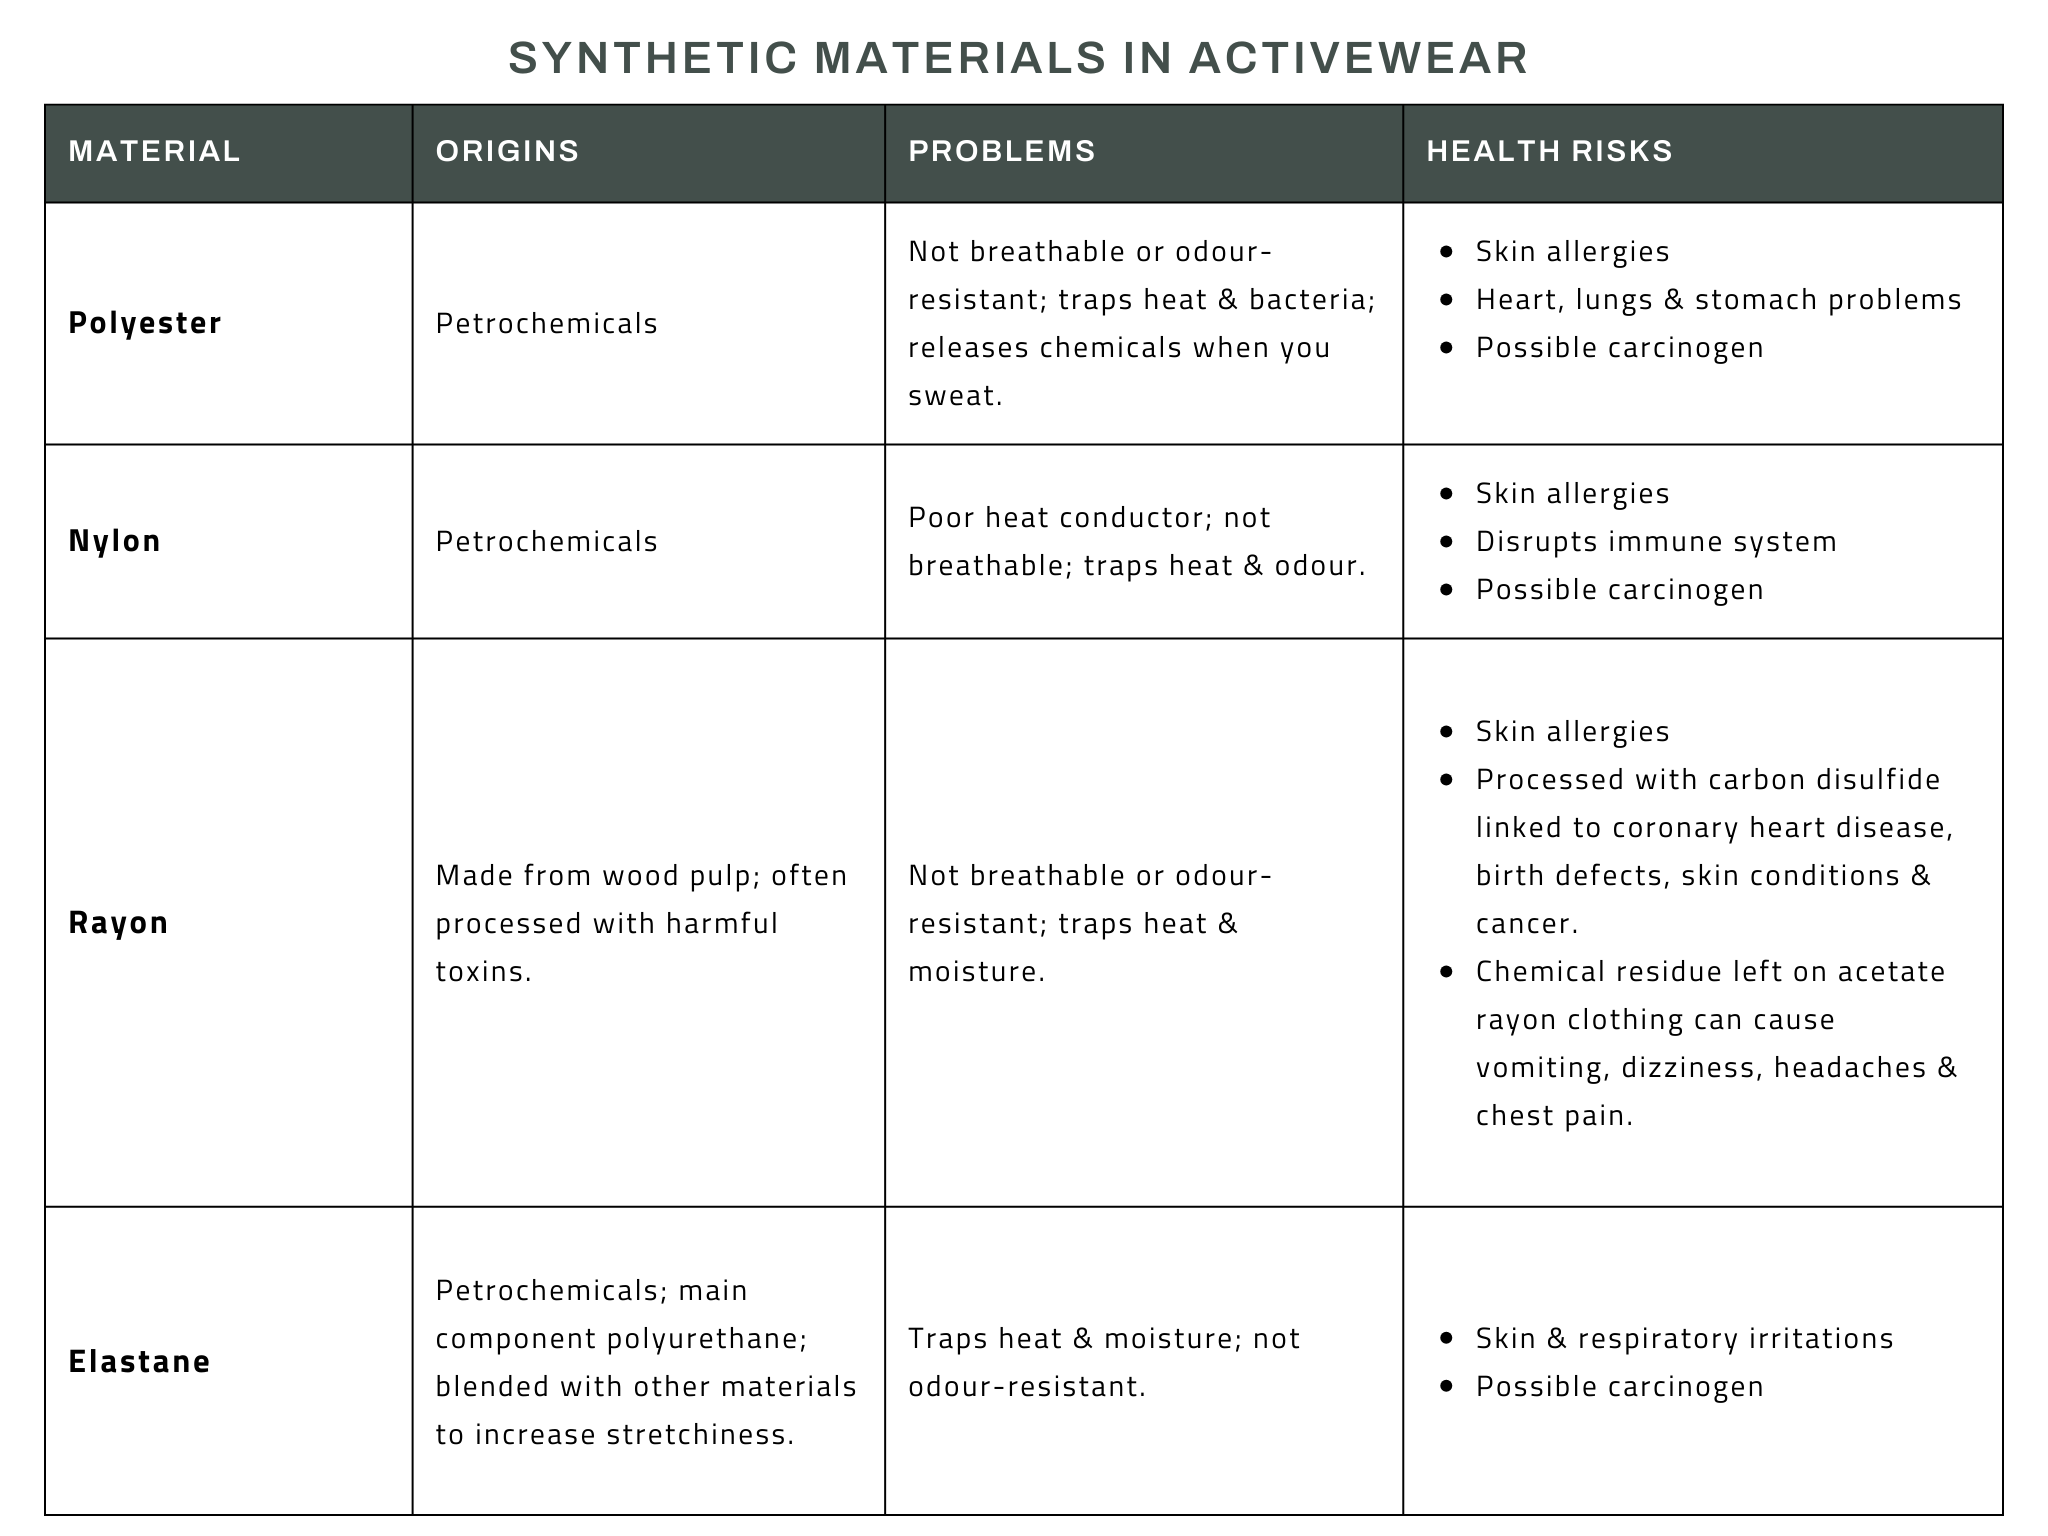 Table detailing toxic clothing materials, problems with performance and health risks.